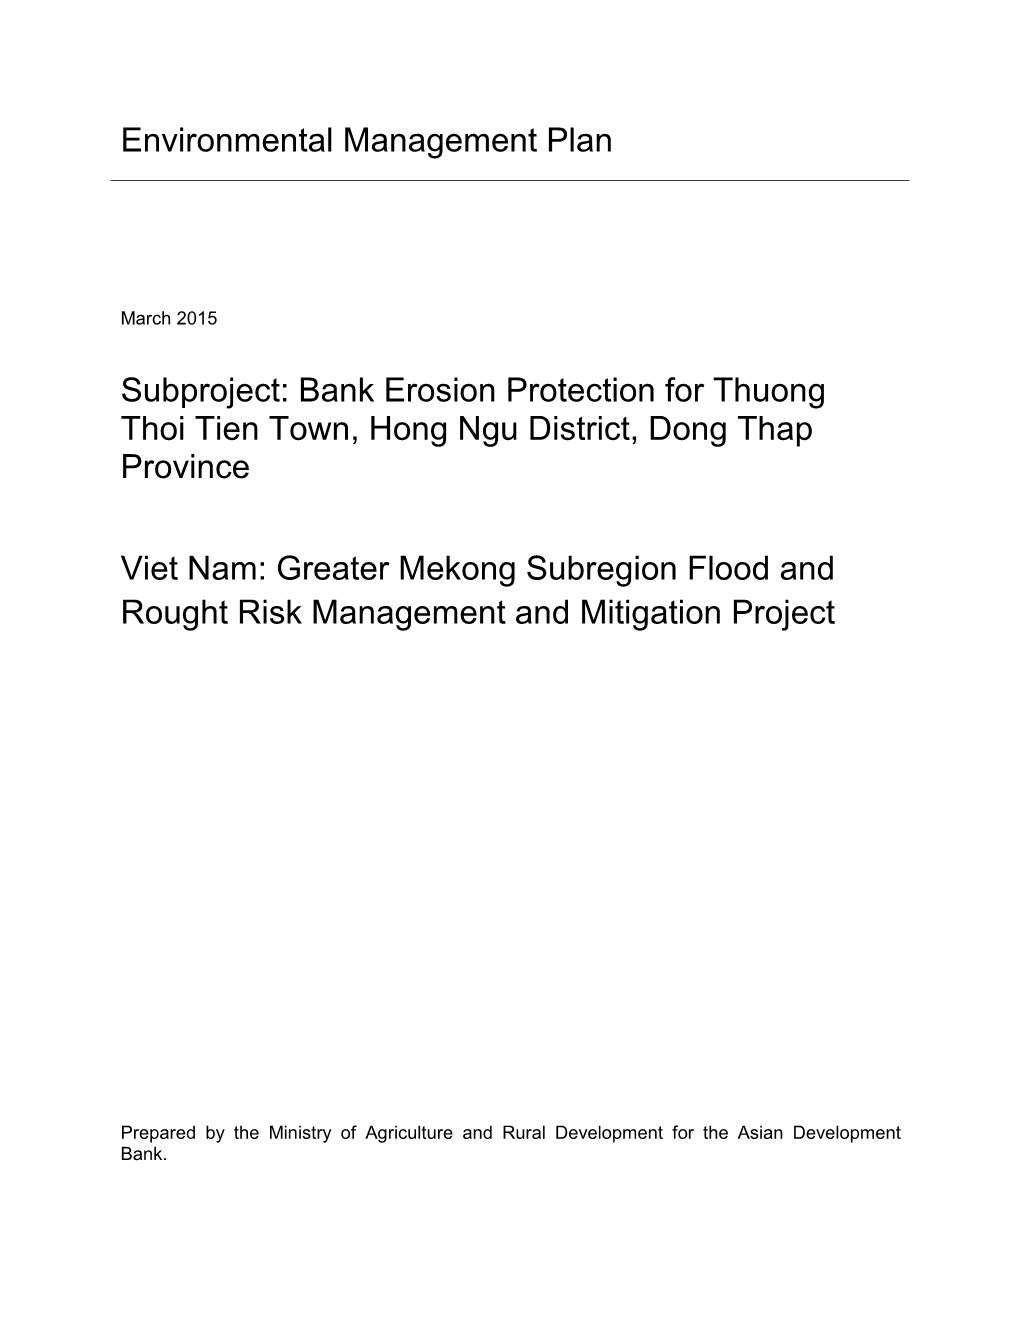 40190-023: Bank Erosion Protection for Thuong Thoi Tien Town, Hong